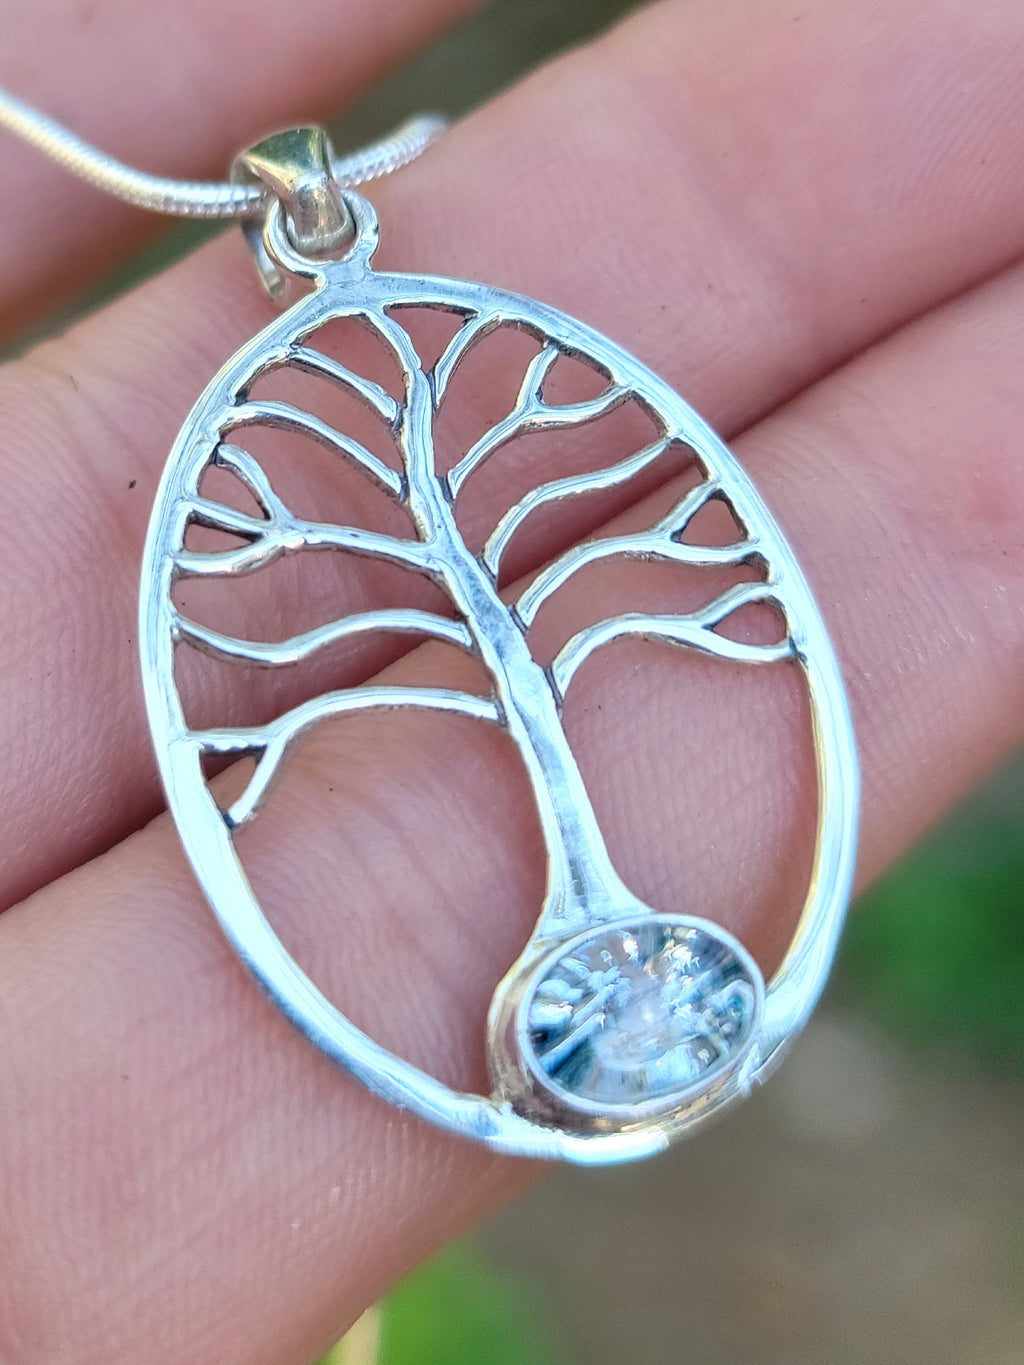 NEW Cremation Jewelry Pendant Bohemian Tree of Life Ashes InFused Glass Bali Silver